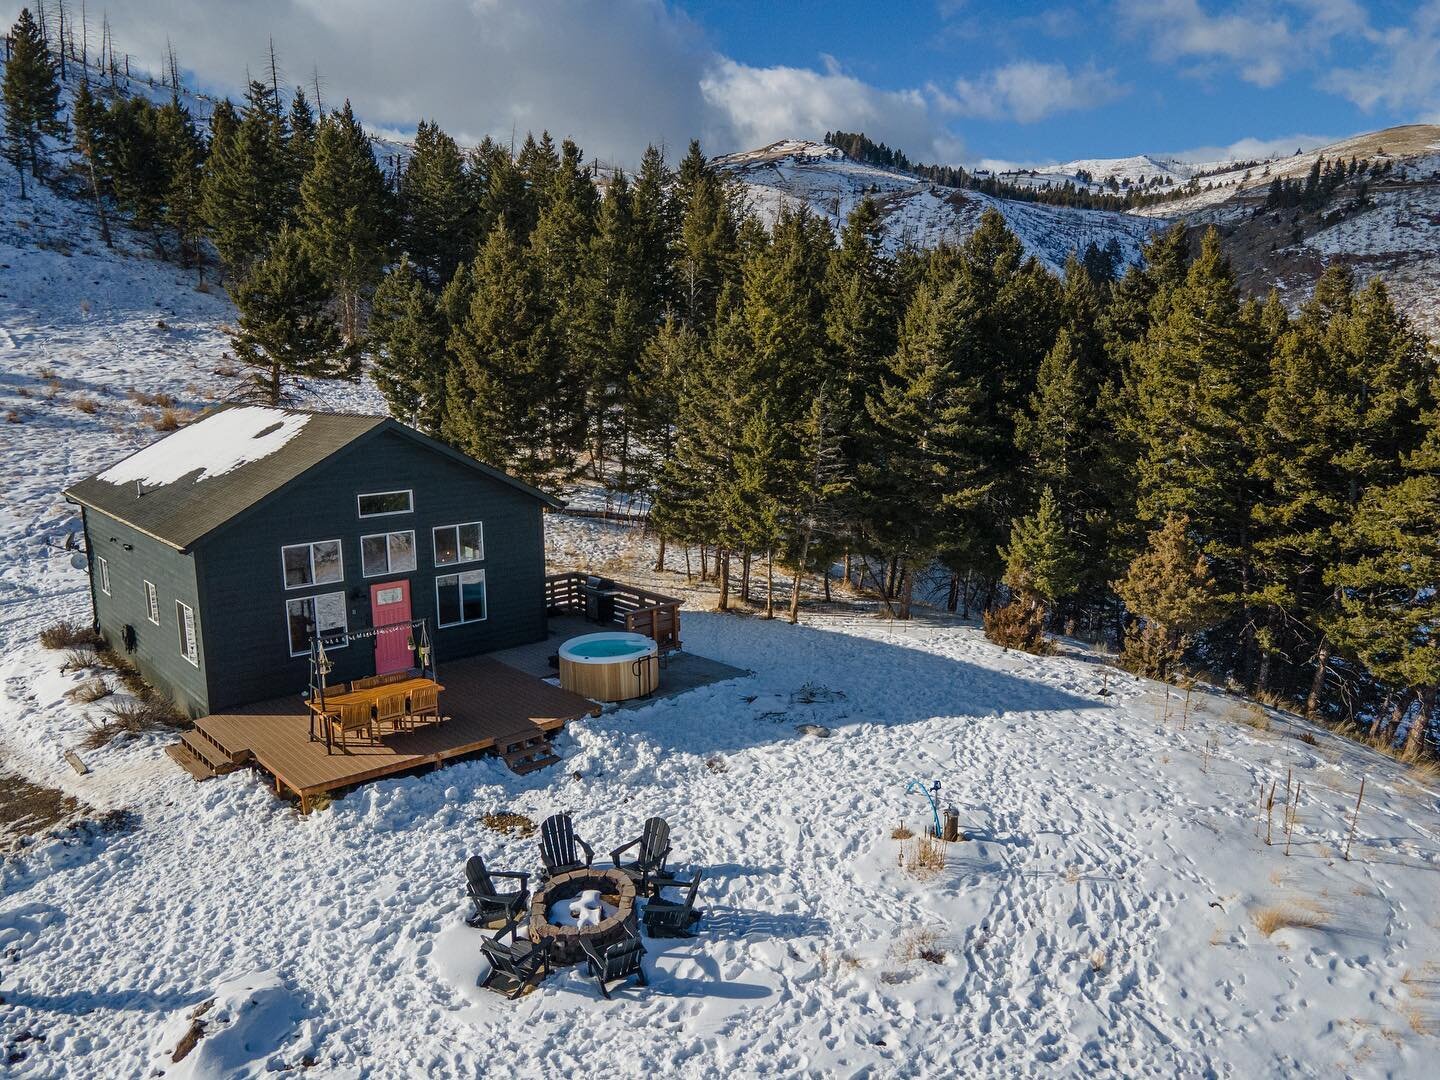 Speaking of views, this Paradise Valley property has all of them. 

#realestate #realestatephotography #mountains #montana #bozeman #bozemanmontana #home #house #livingstonmontana #livingston #paradisevalley #paradisevalleymontana #emigrant #emigrant